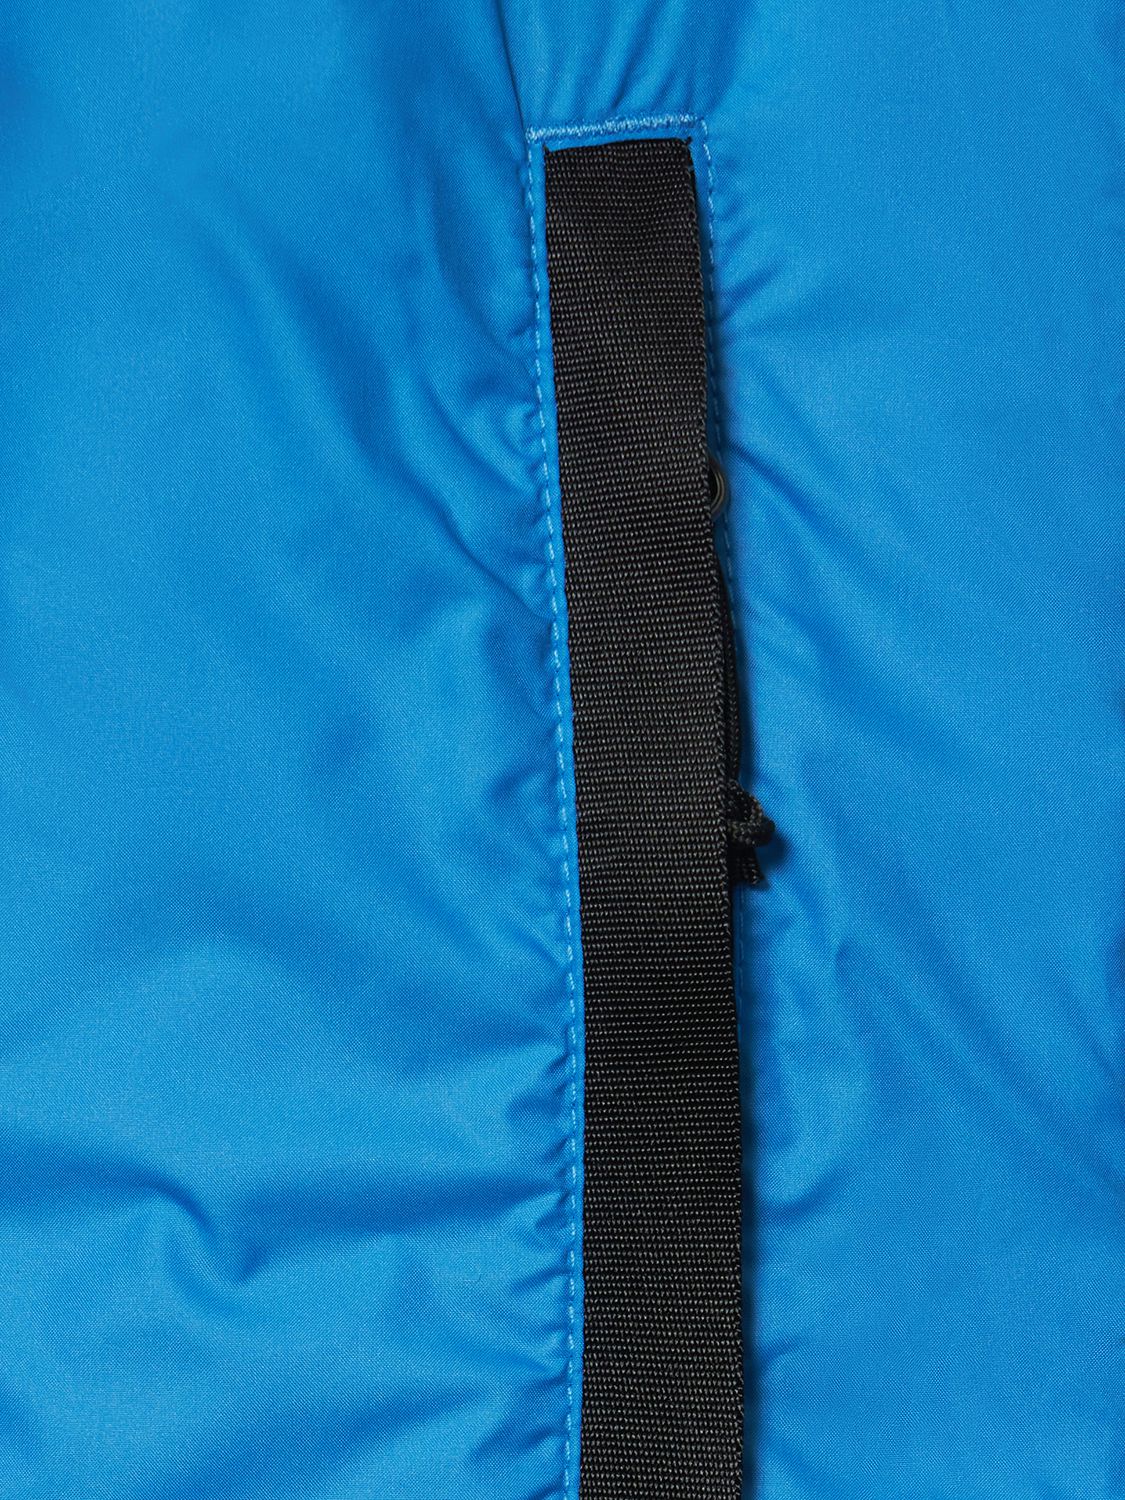 THE NORTH FACE HIMALAYAN INSULATED JACKET 